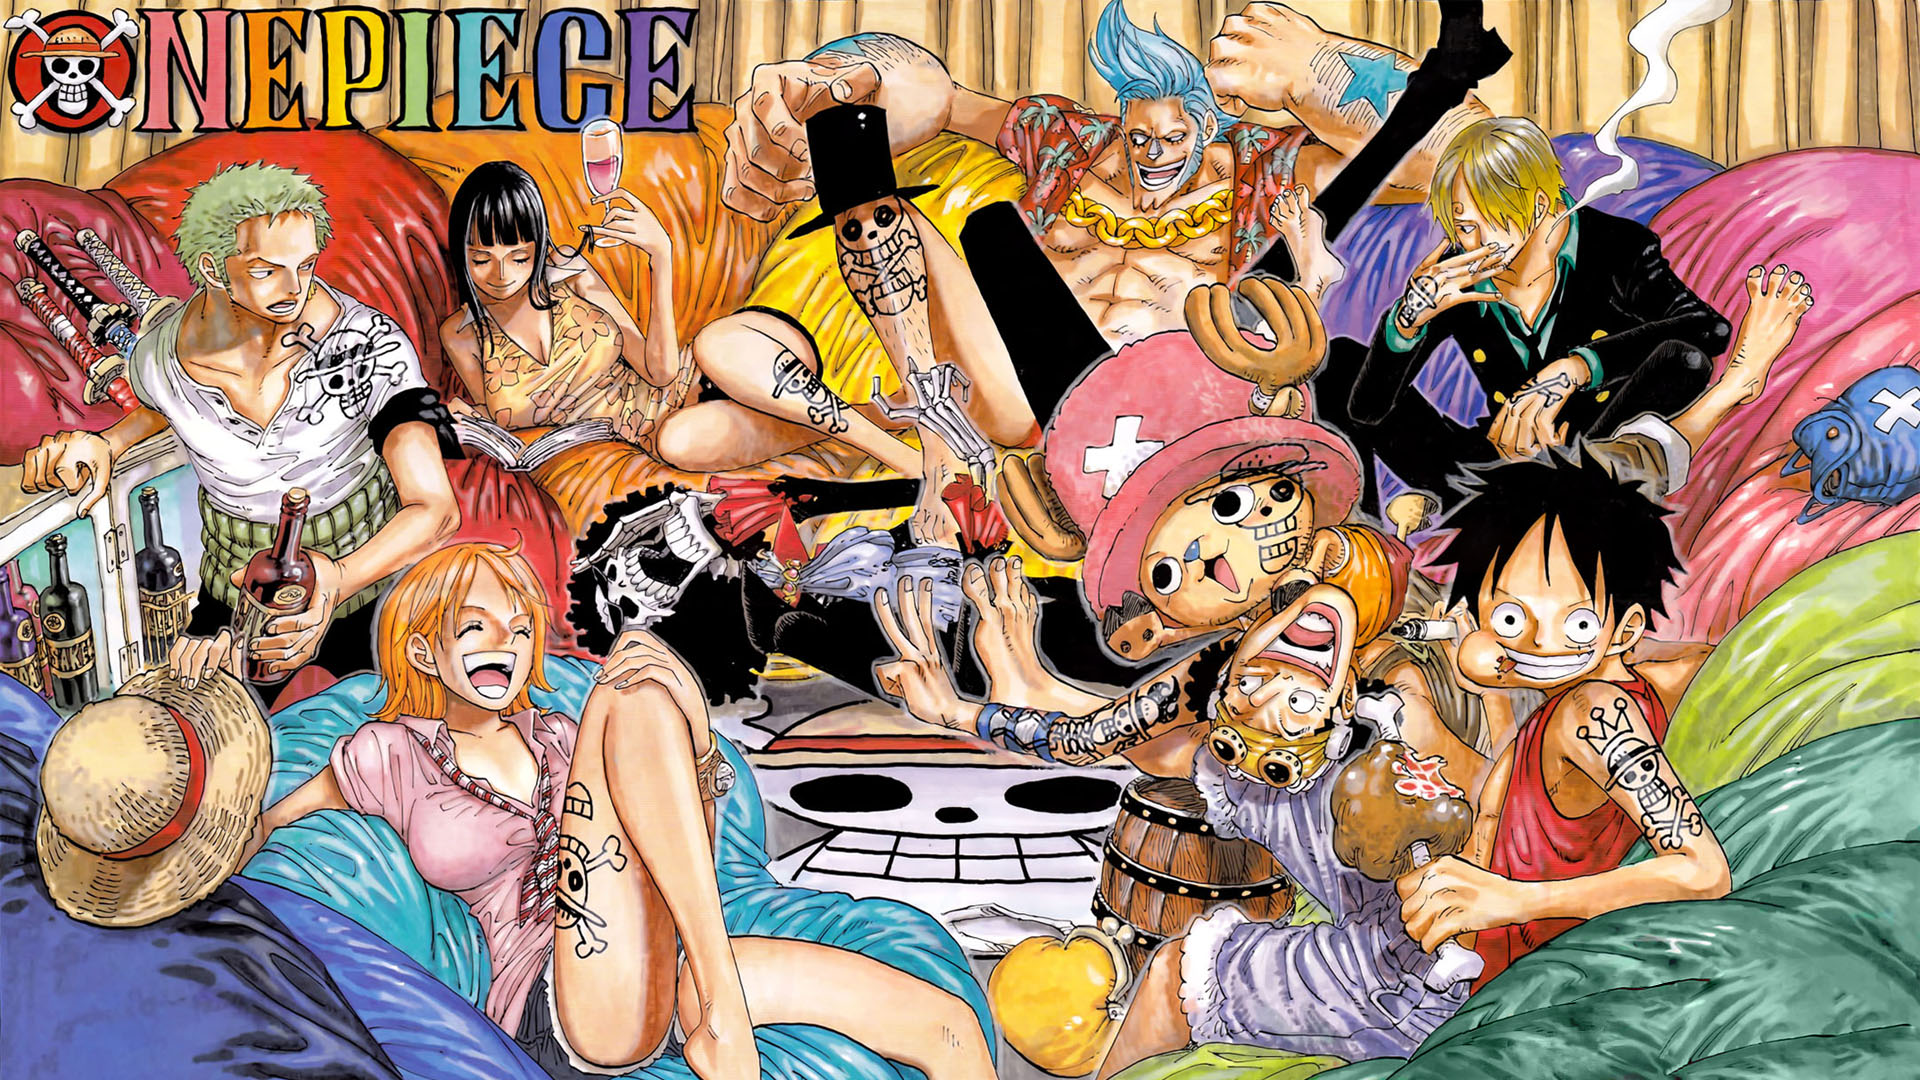 One Piece Hd Wallpapers - HD Wallpapers and Pictures